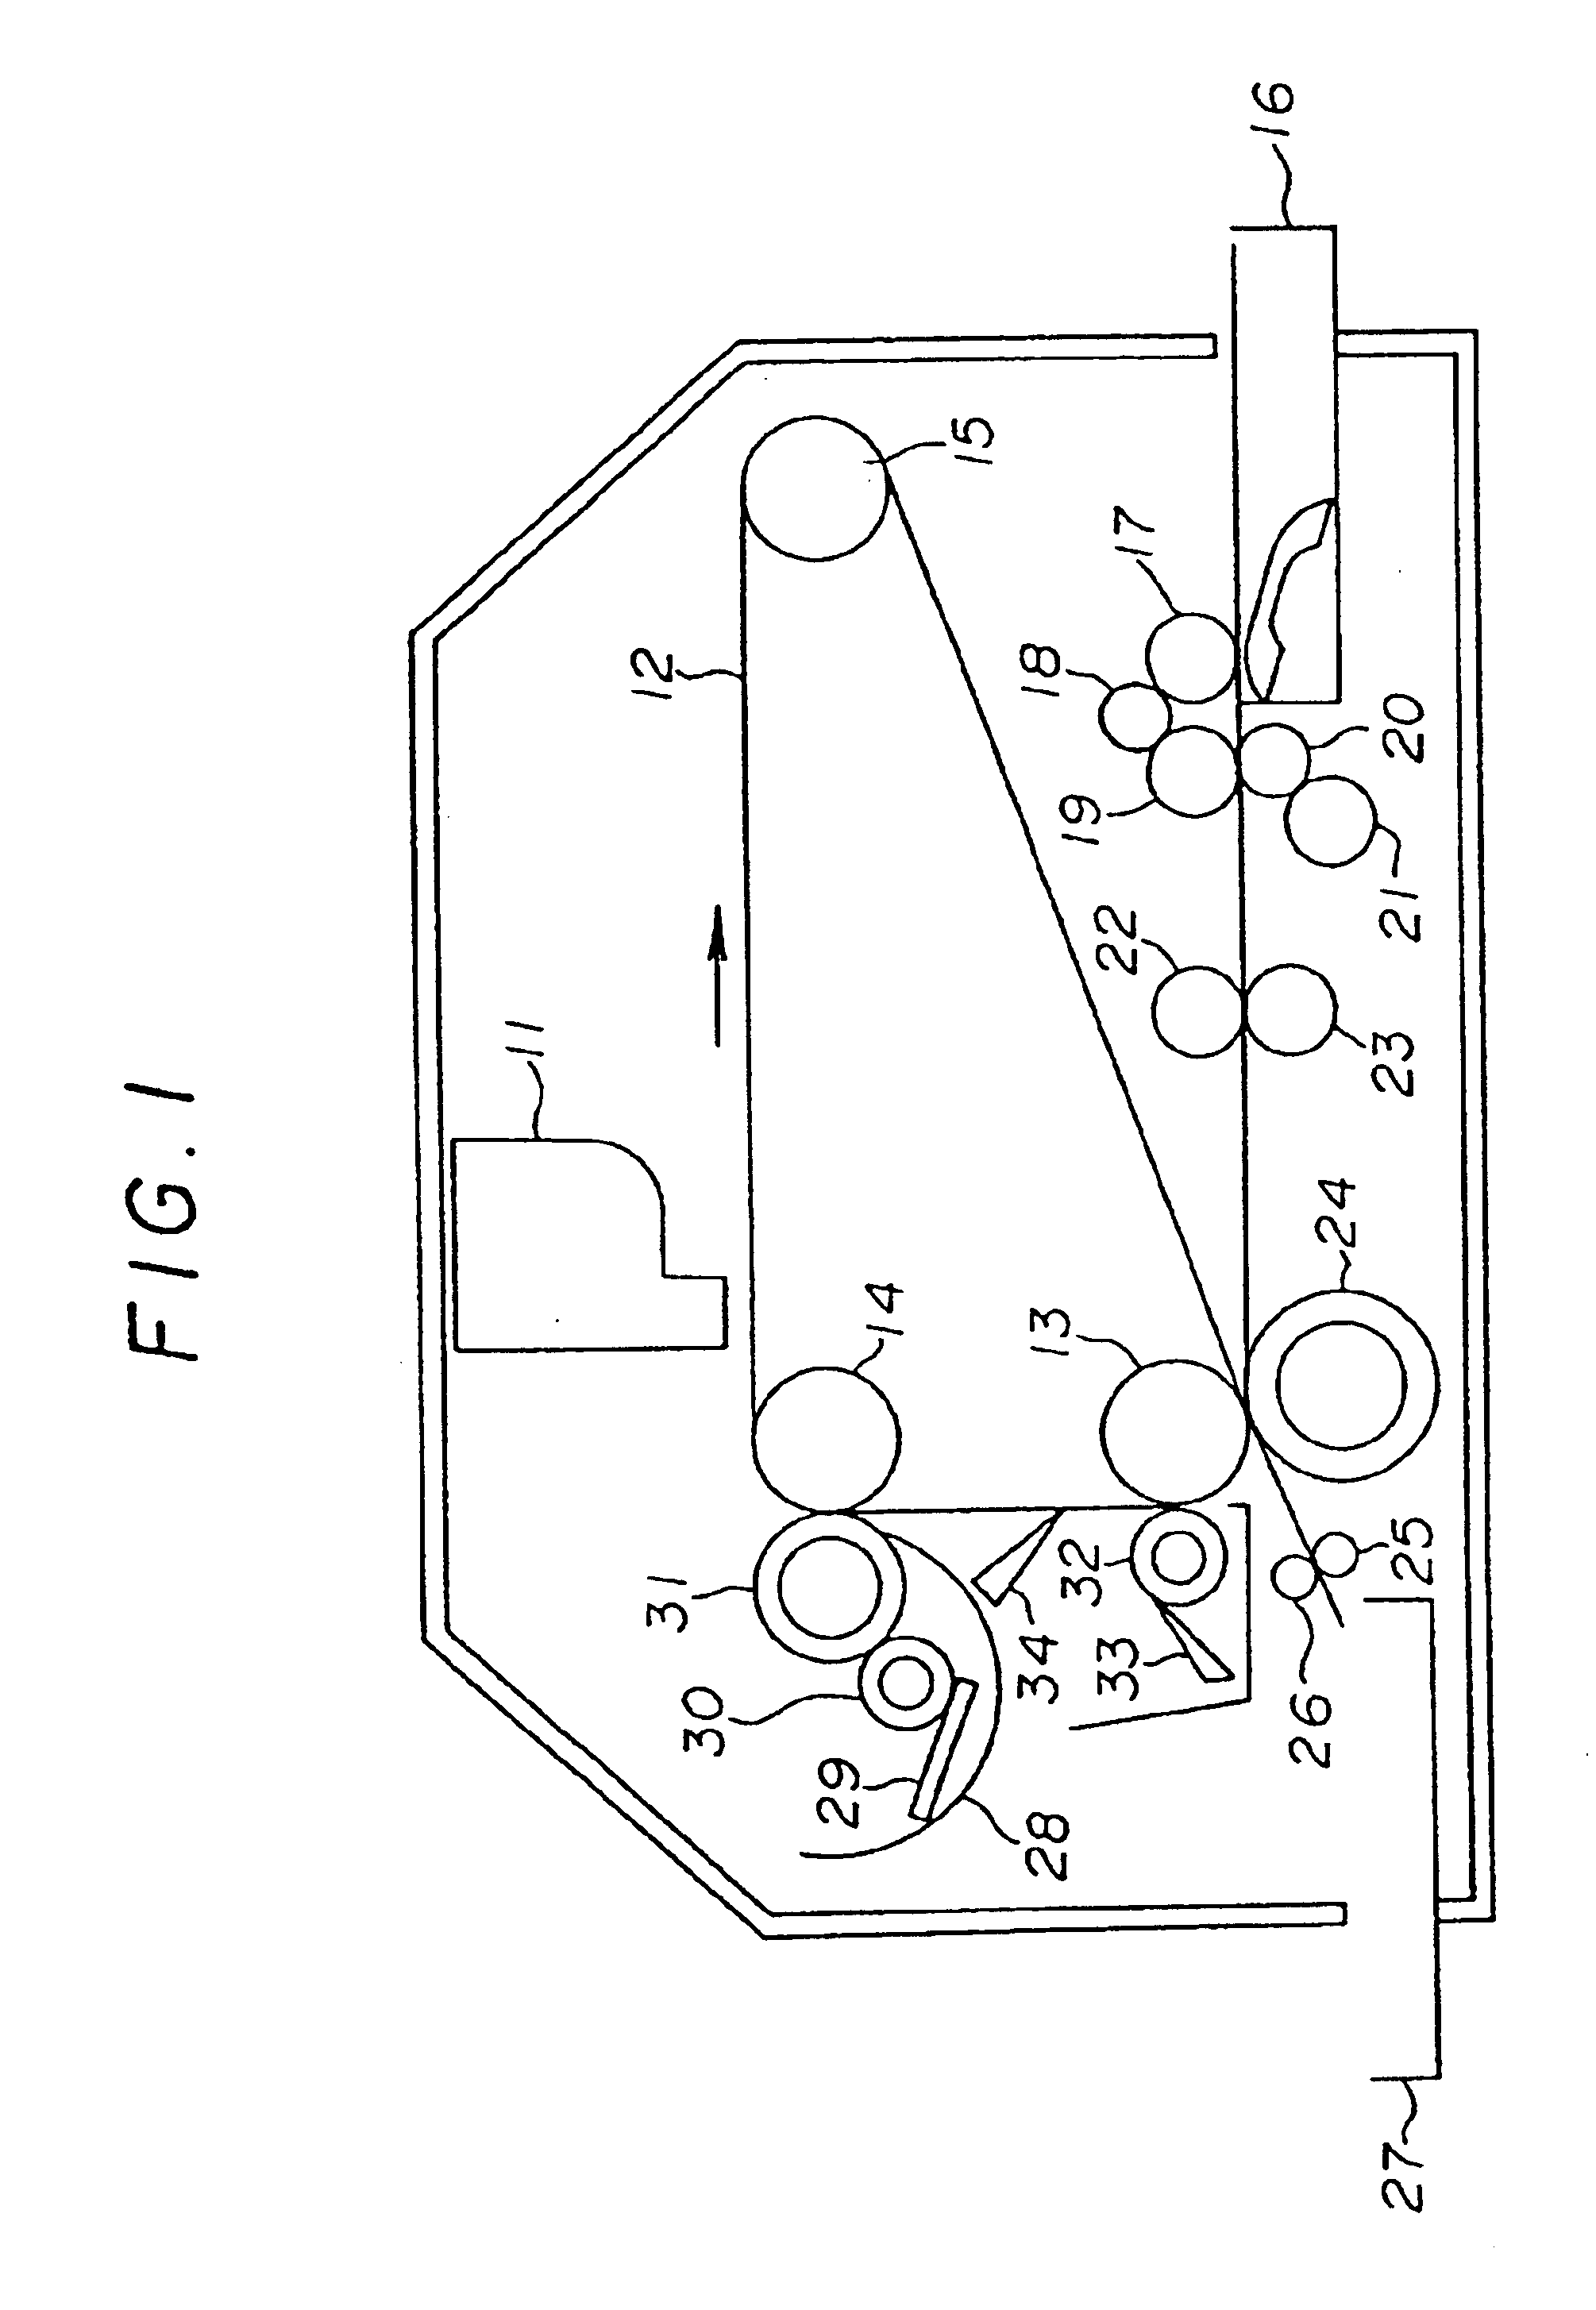 Recording method and apparatus with an intermediate transfer medium based on transfer-type recording mechanism